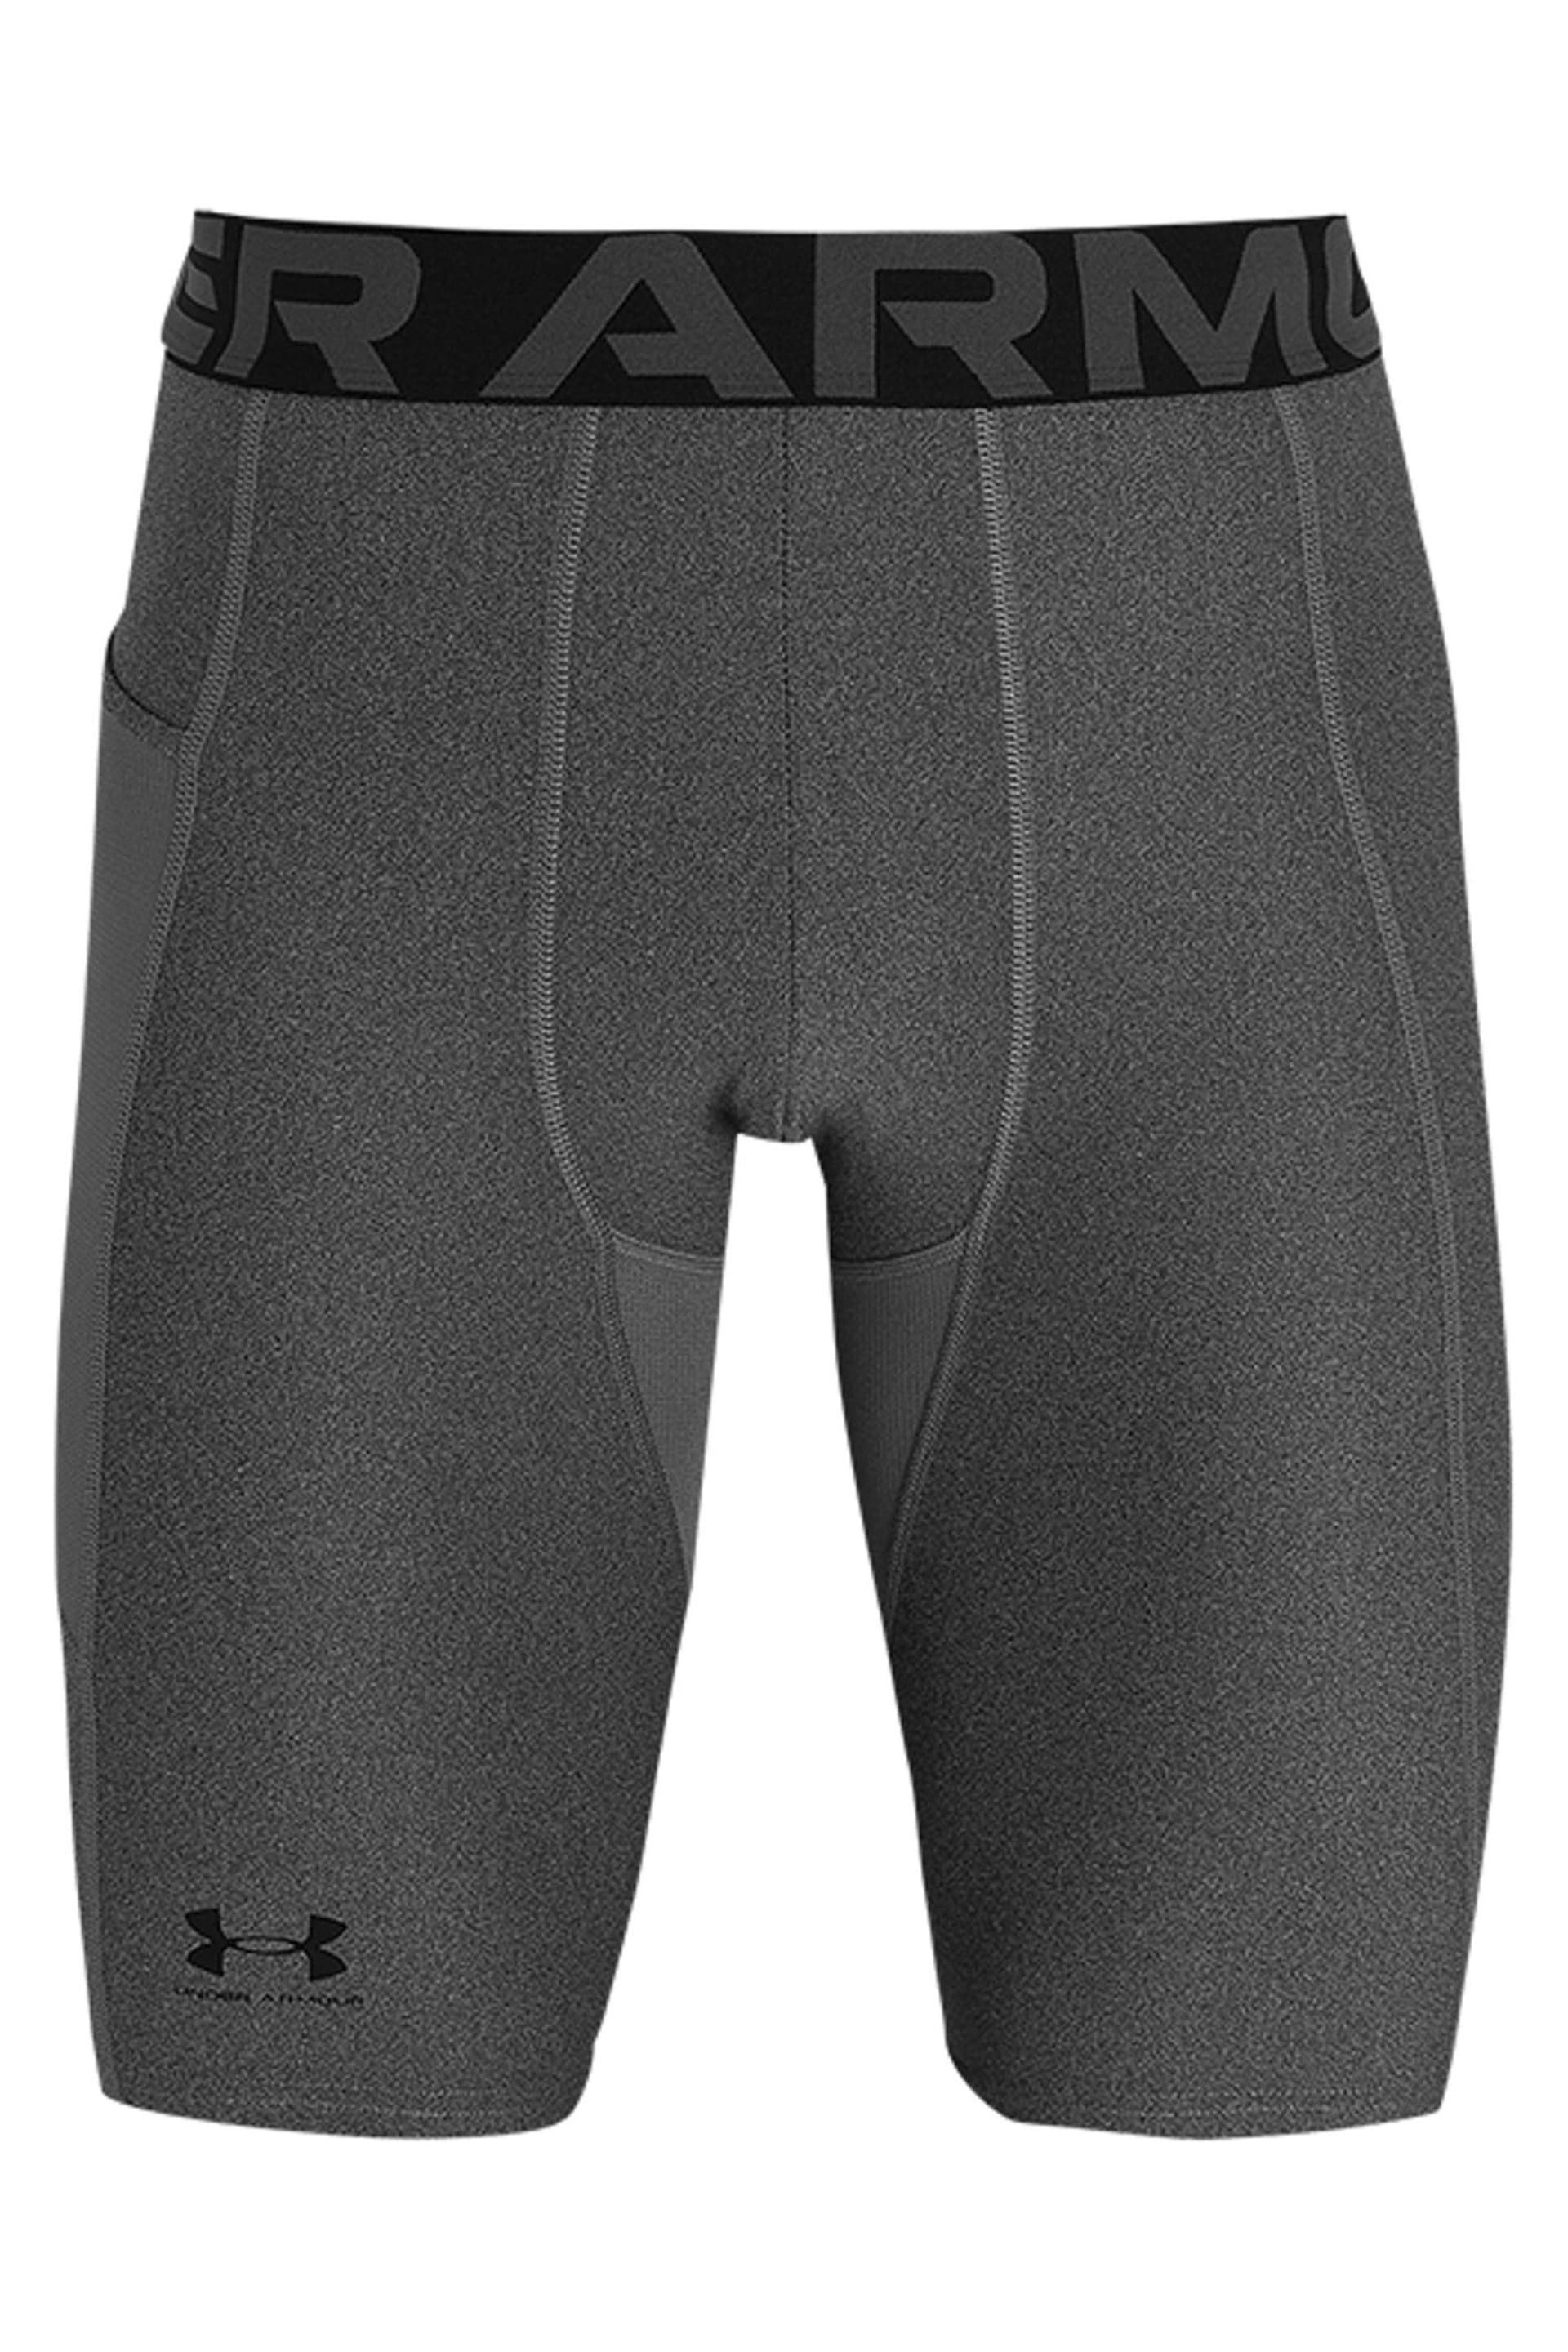 Under Armour Grey Heat Gear Armour Long Shorts - Image 5 of 8